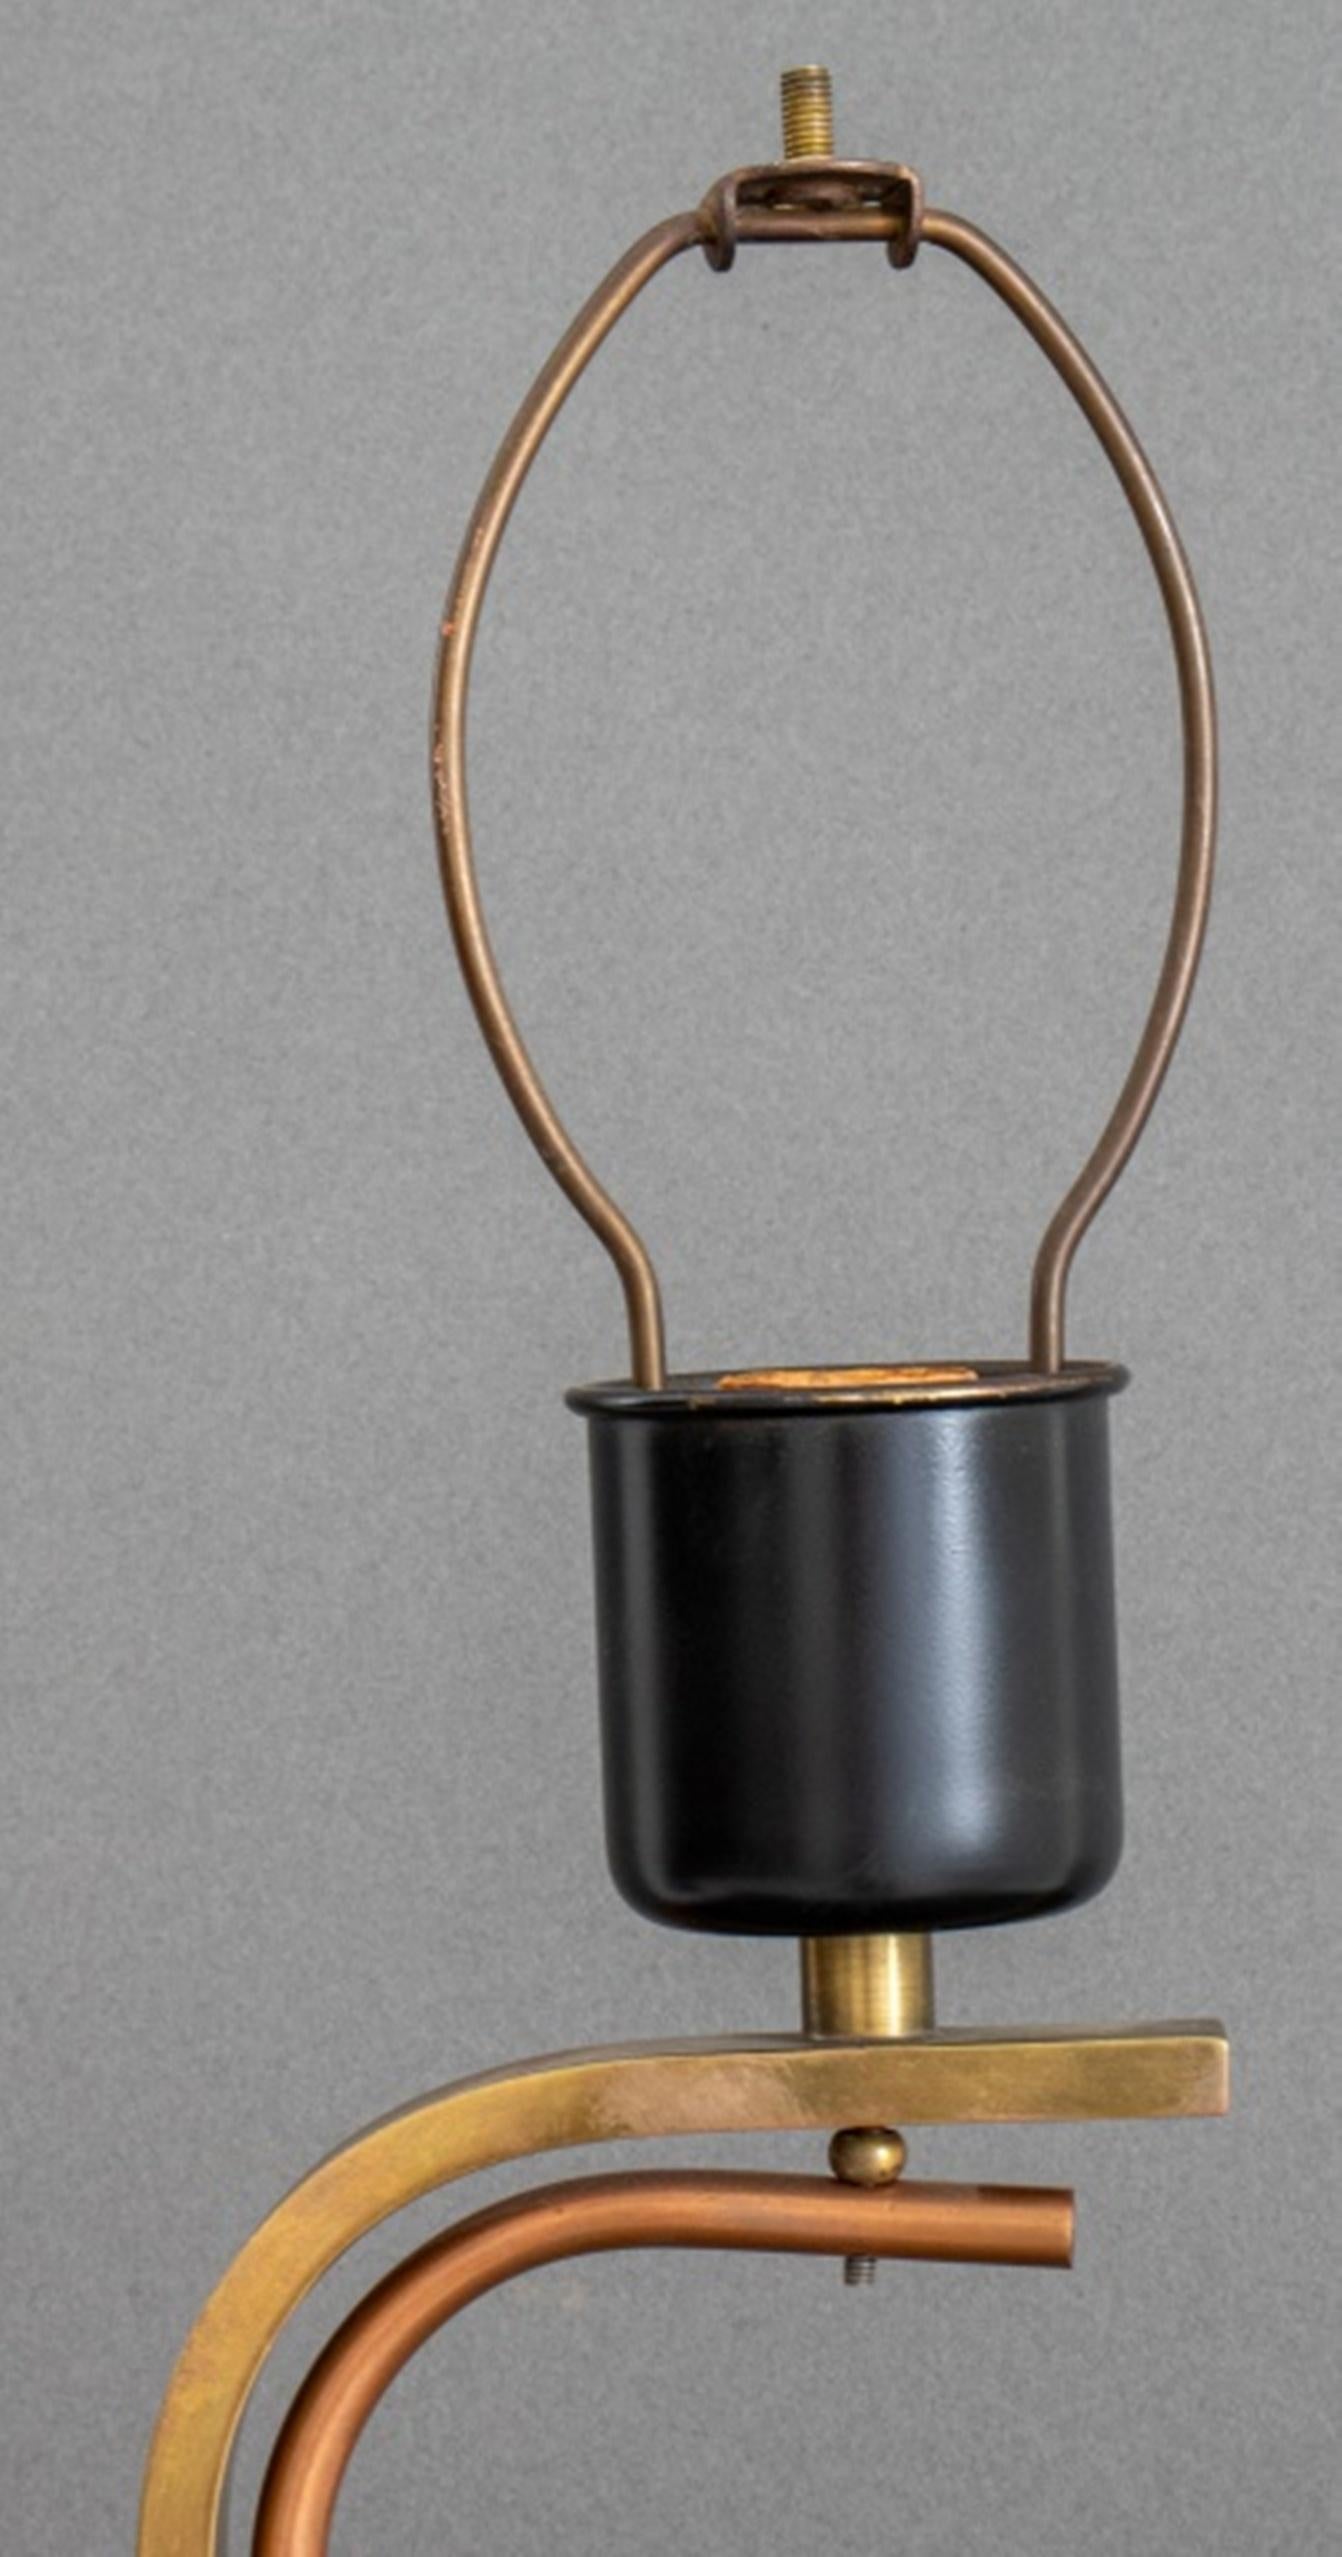 Mid-Century Brass and Copper Scroll Form Lamp on square ebonized plinth.

Dimensions: 30